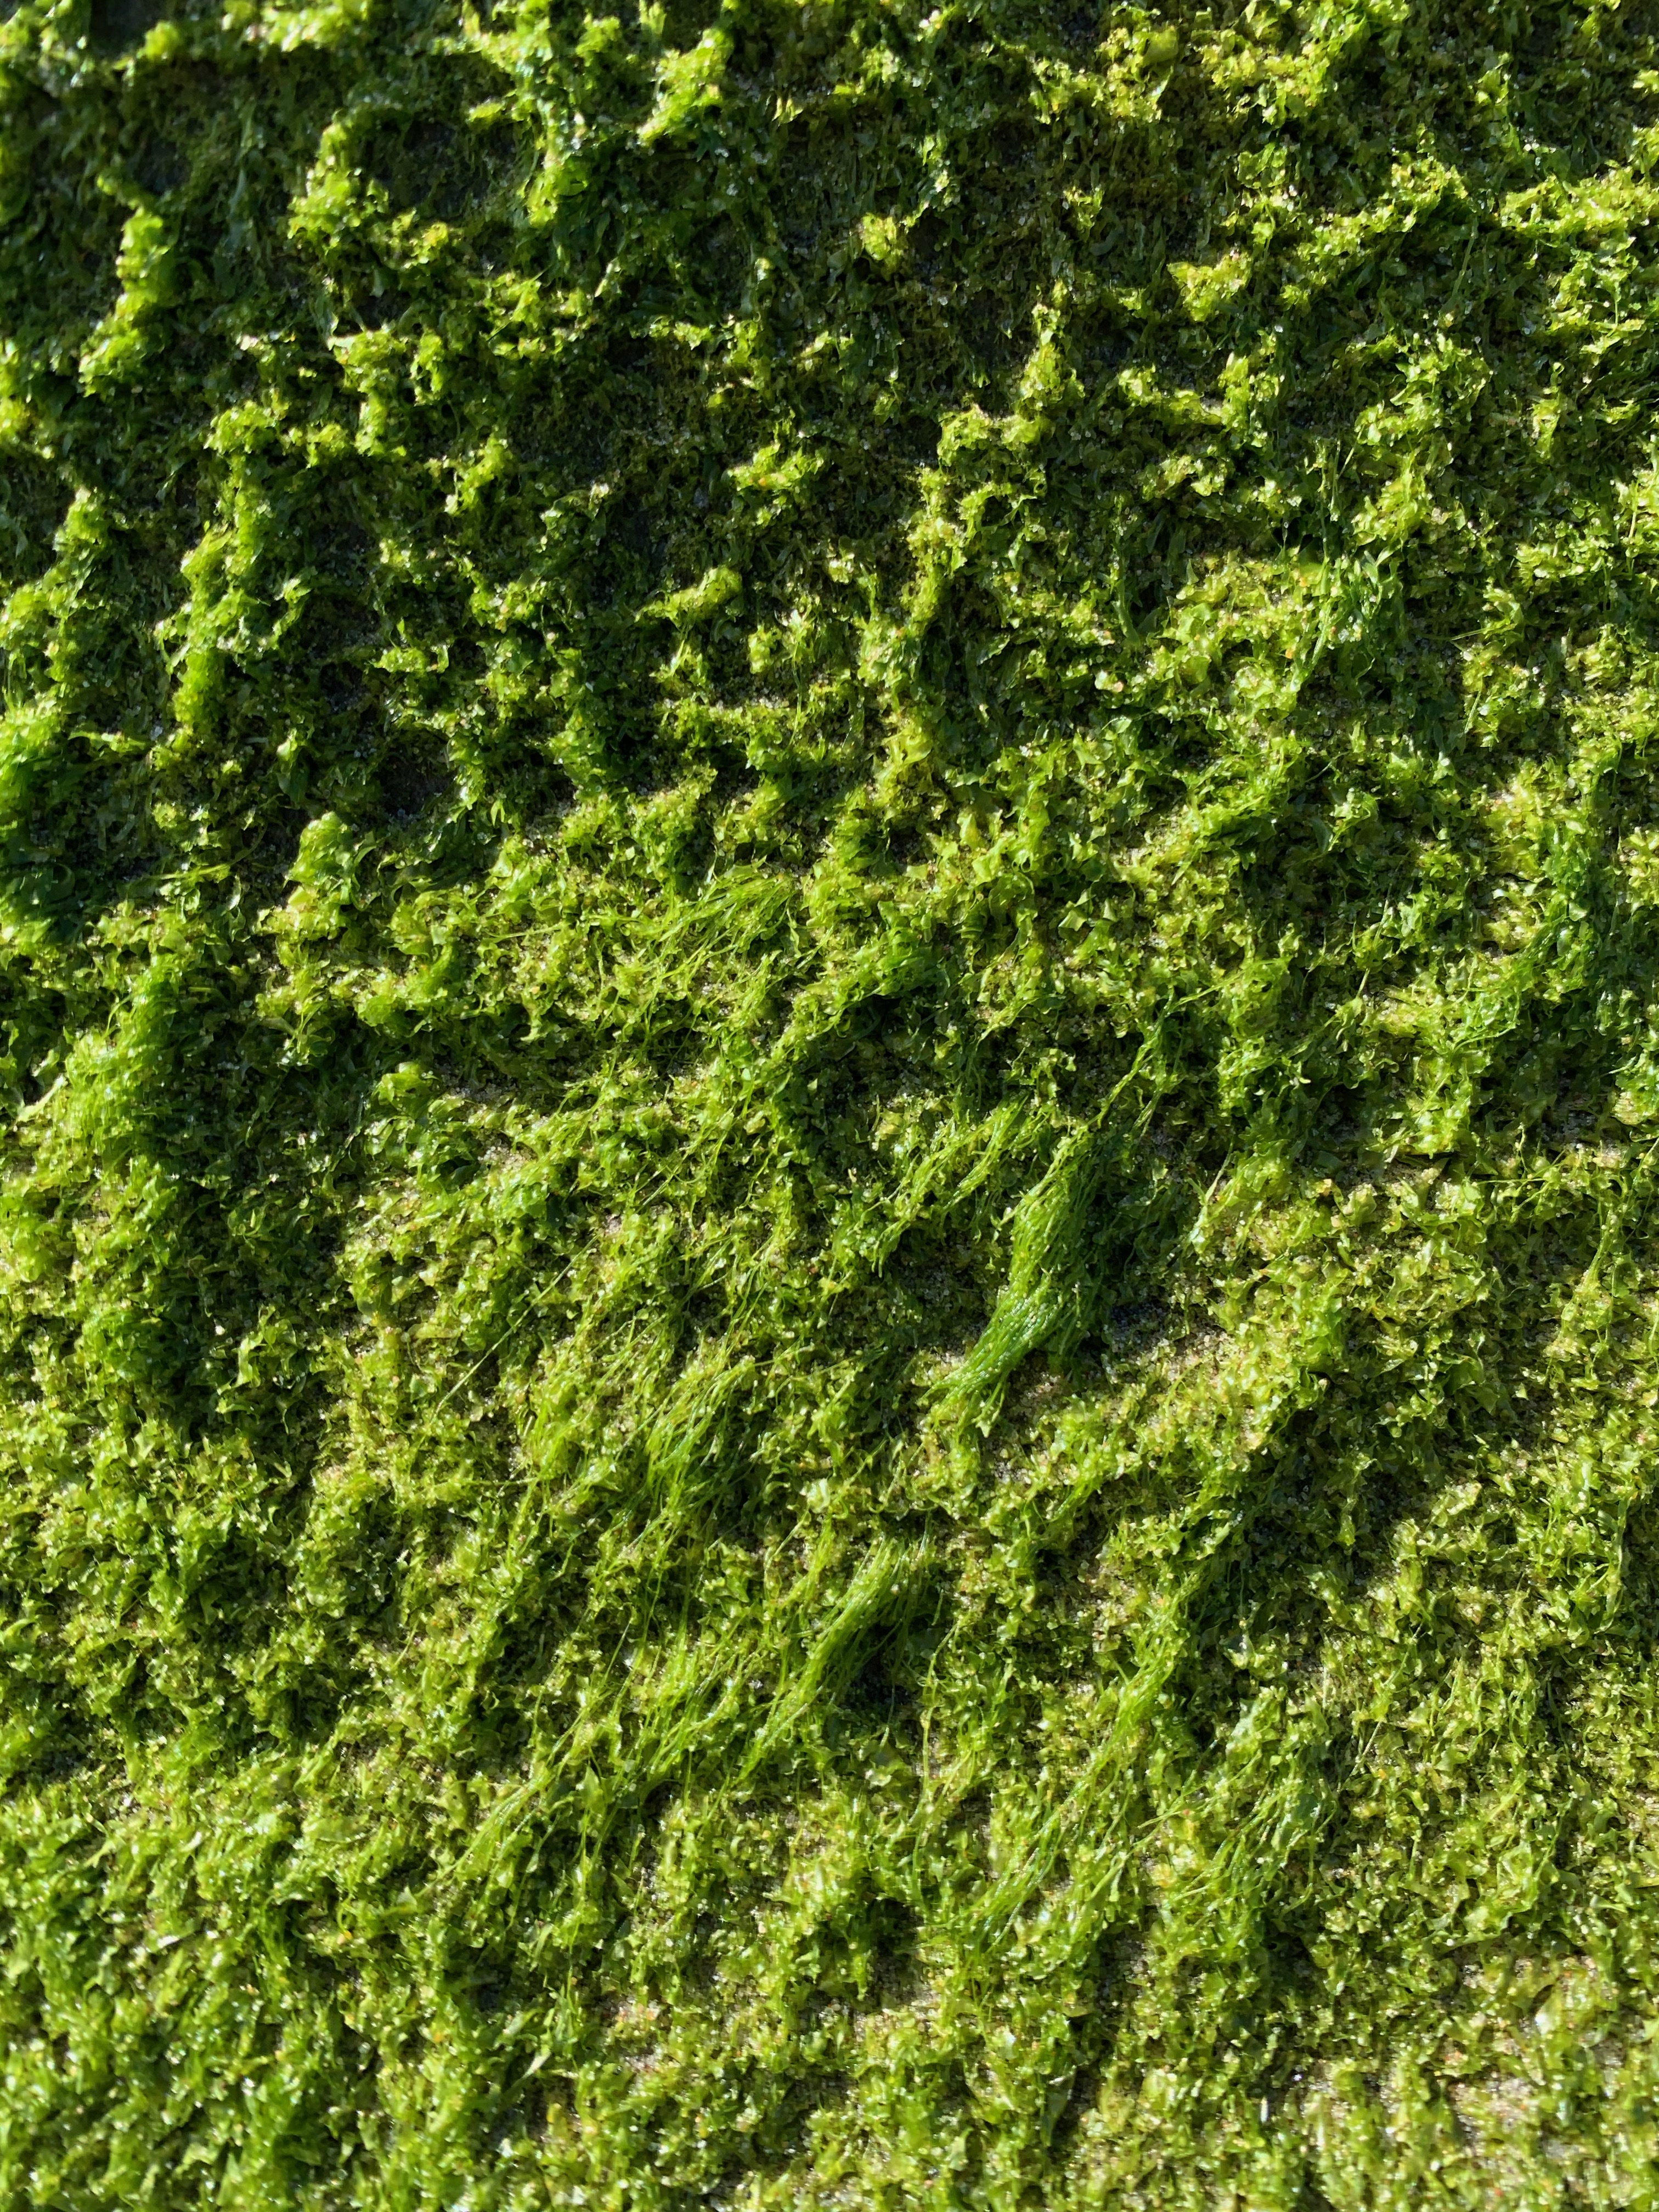 Small and green—just some moss?